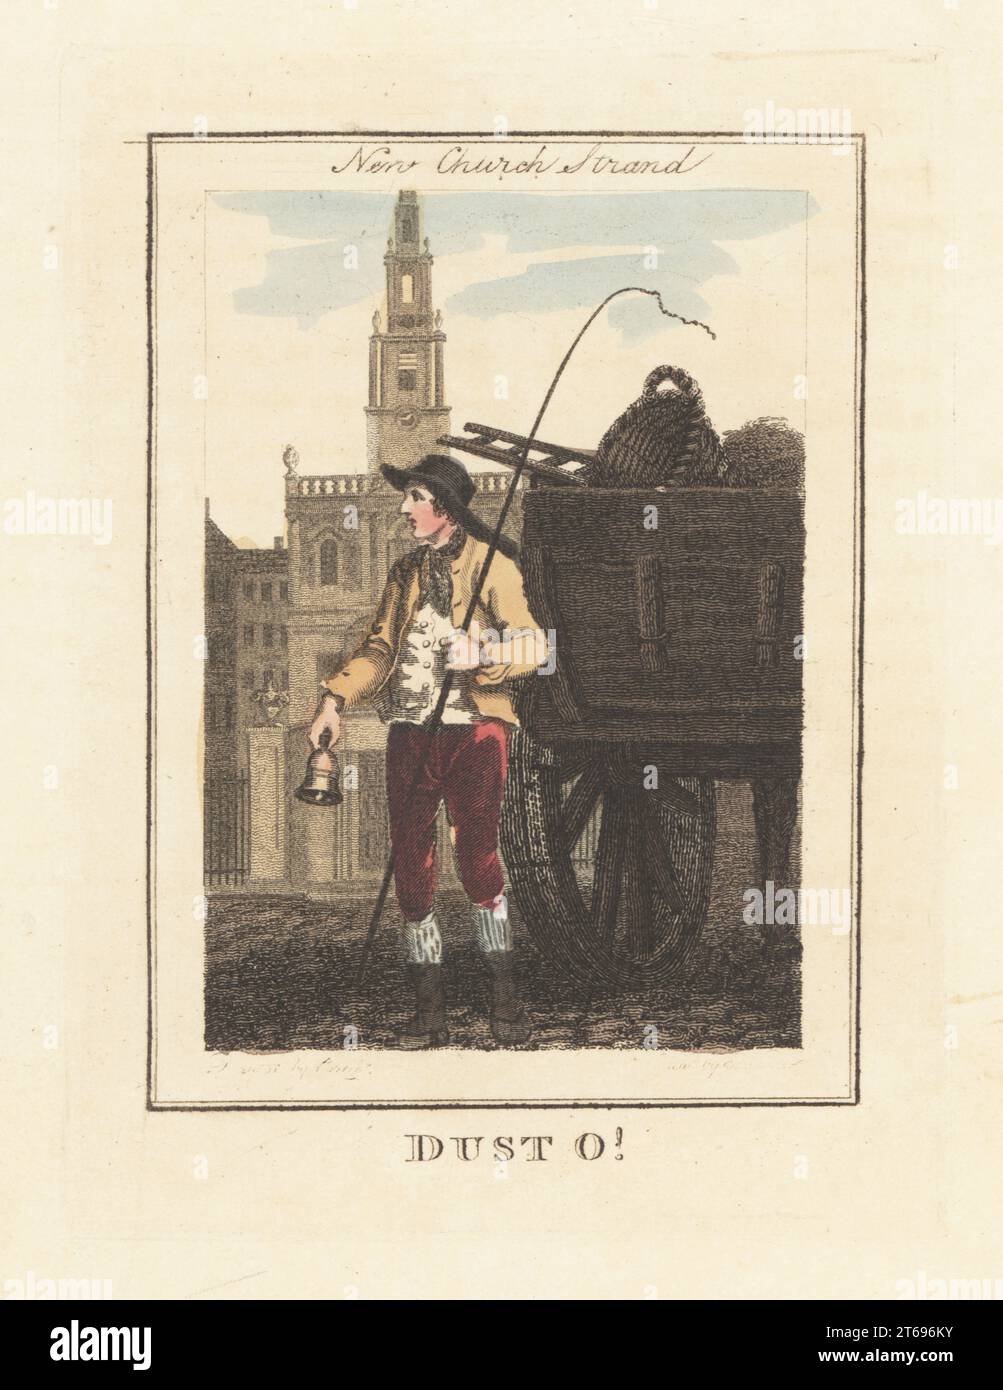 Dustman with dust cart in front of New Church Strand. In hat, jacket, waistcoat, breeches and boots, holding a bell and whip. Wagon loaded with broken ladder, basket, and other rubbish. In front of St Mary le Strand Church. Handcoloured copperplate engraving by Edward Edwards after an illustration by William Marshall Craig from Description of the Plates Representing the Itinerant Traders of London, Richard Phillips, No. 71 St Pauls Churchyard, London, 1805. Stock Photo